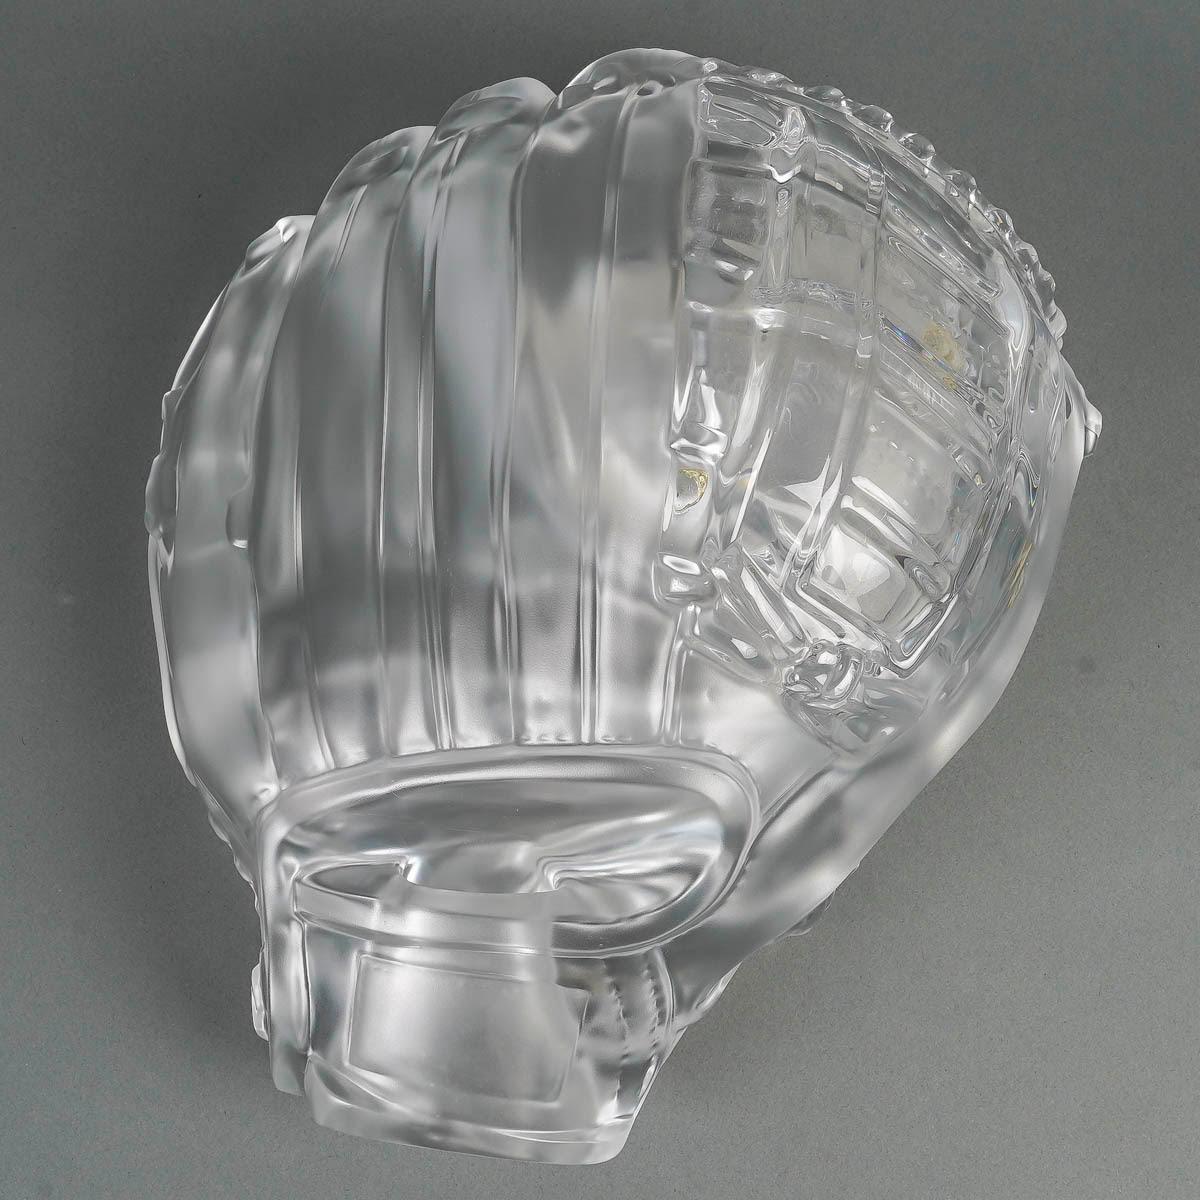 Crystal Baseball Glove Forming a Cup, 20th Century. For Sale 2